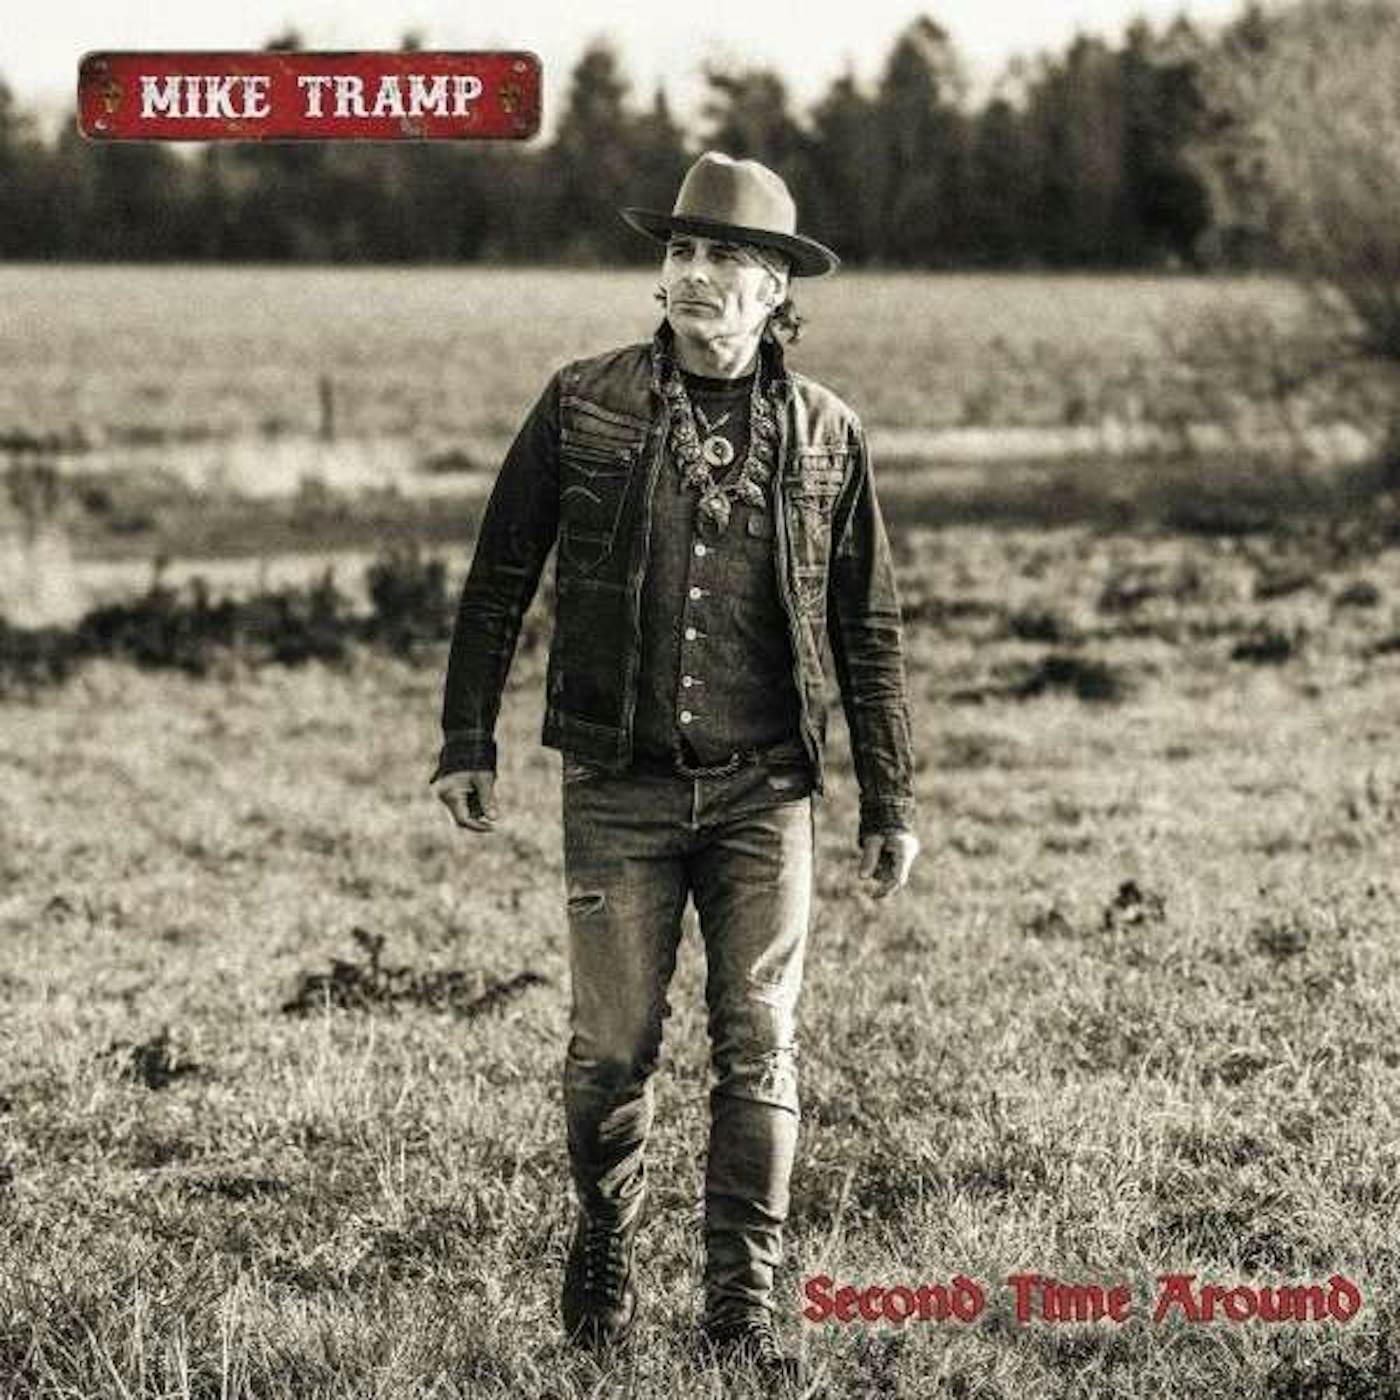 Mike Tramp SECOND TIME AROUND (LIMITED EDITION RED VINYL) Vinyl Record